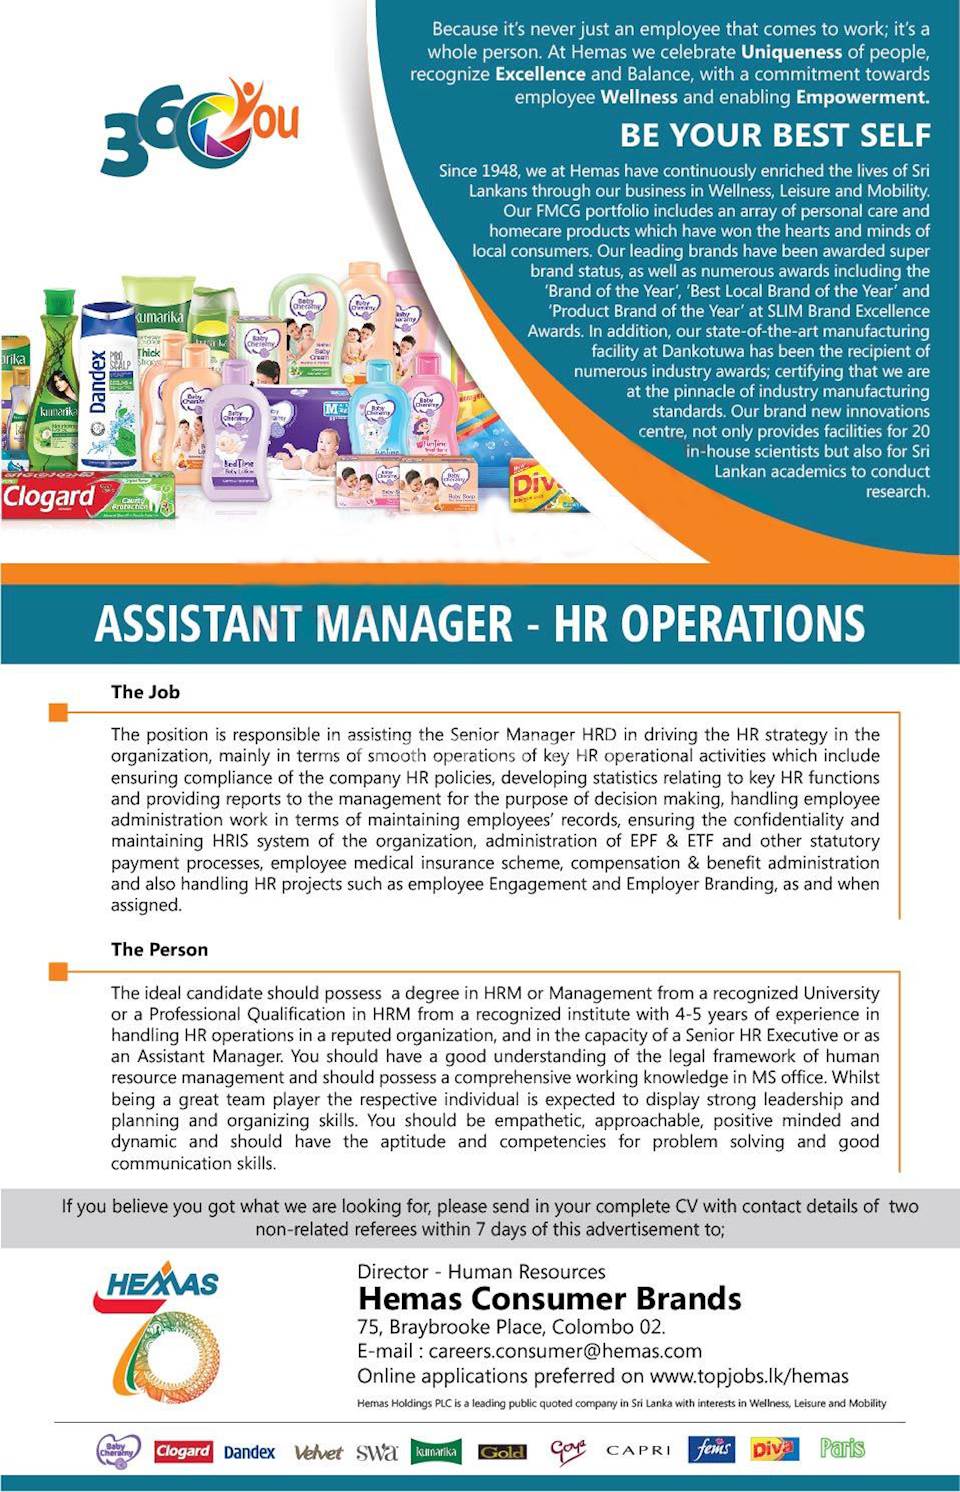 Assistant Manager - HR Operations